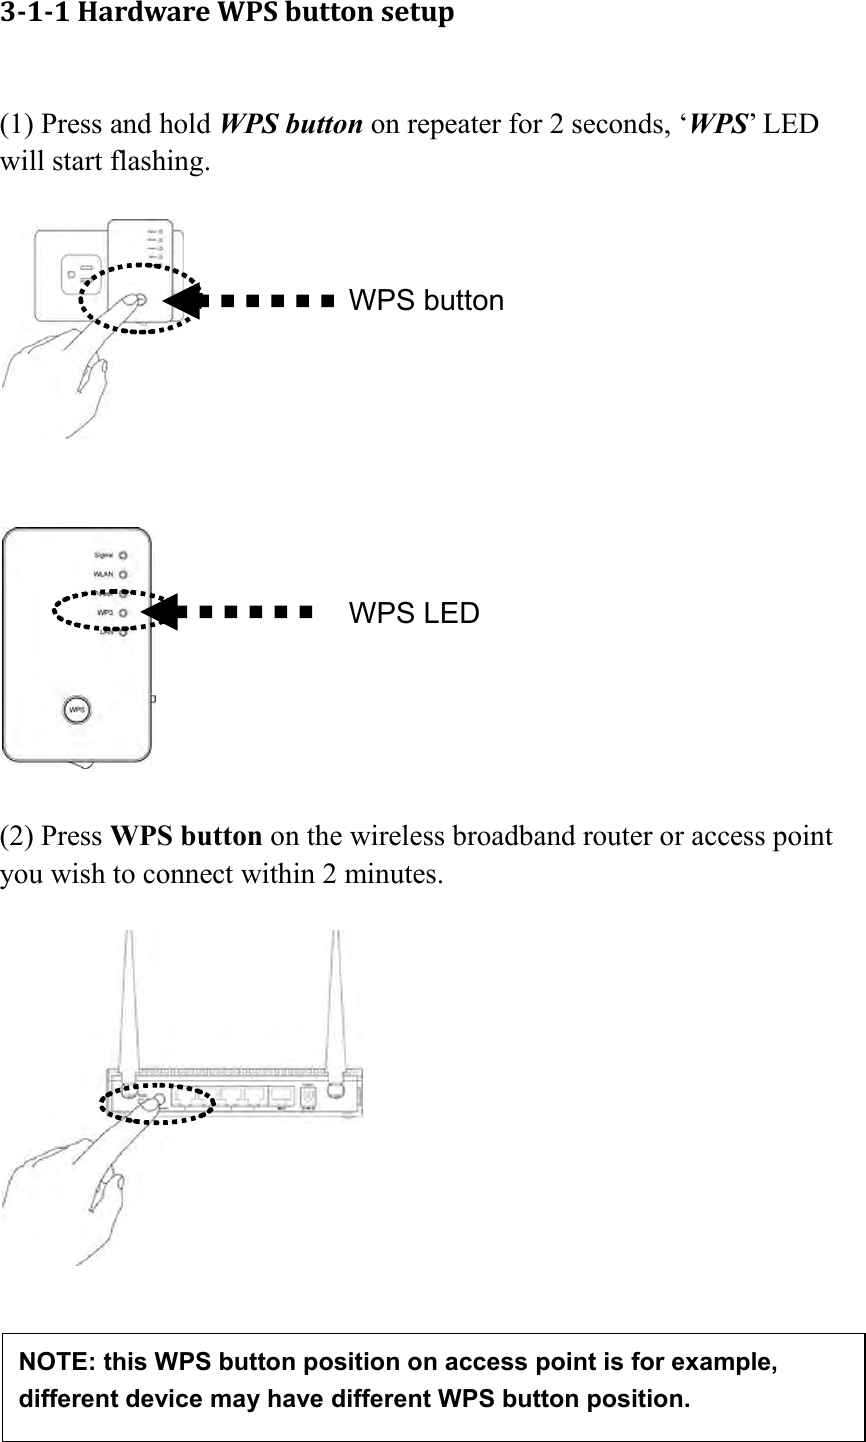  46  3-1-1 Hardware WPS button setup  (1) Press and hold WPS button on repeater for 2 seconds, ‘WPS’ LED will start flashing.       (2) Press WPS button on the wireless broadband router or access point you wish to connect within 2 minutes.        WPS LED WPS button NOTE: this WPS button position on access point is for example, different device may have different WPS button position. 